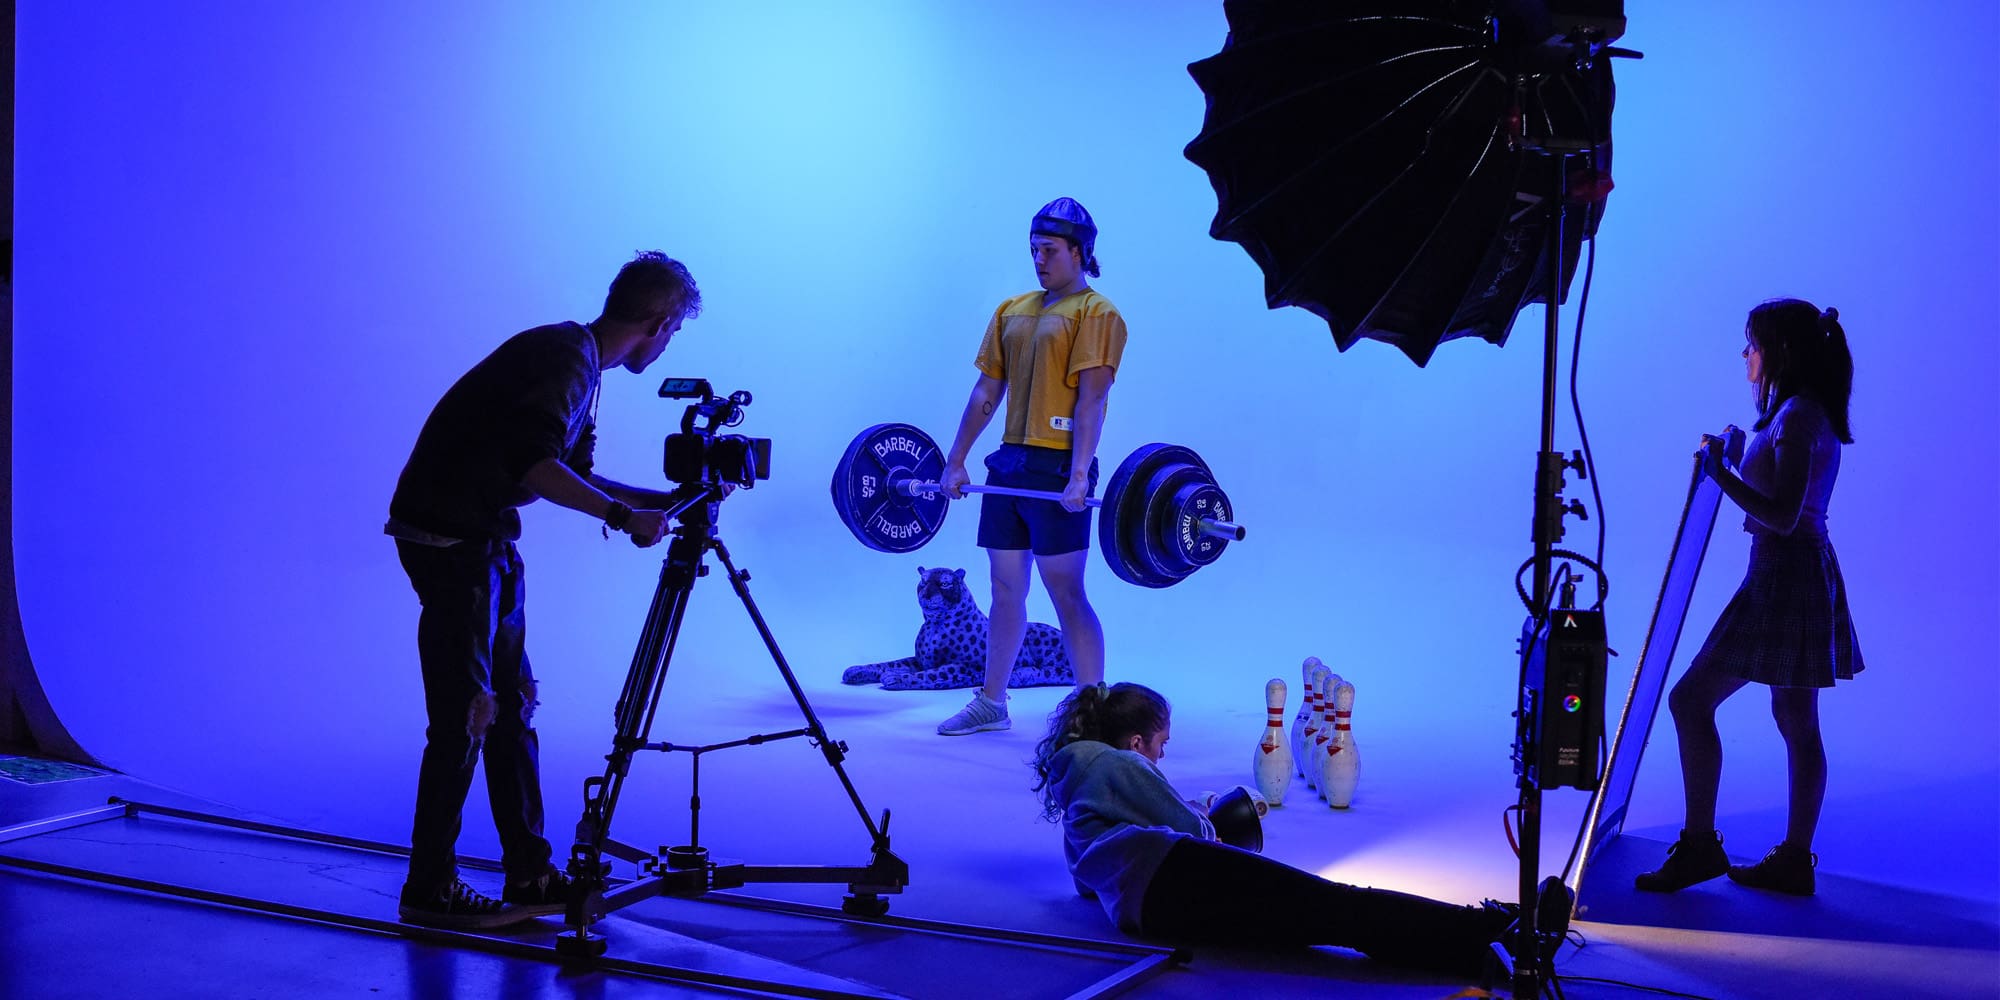 students filming a weight lifter in a dark room